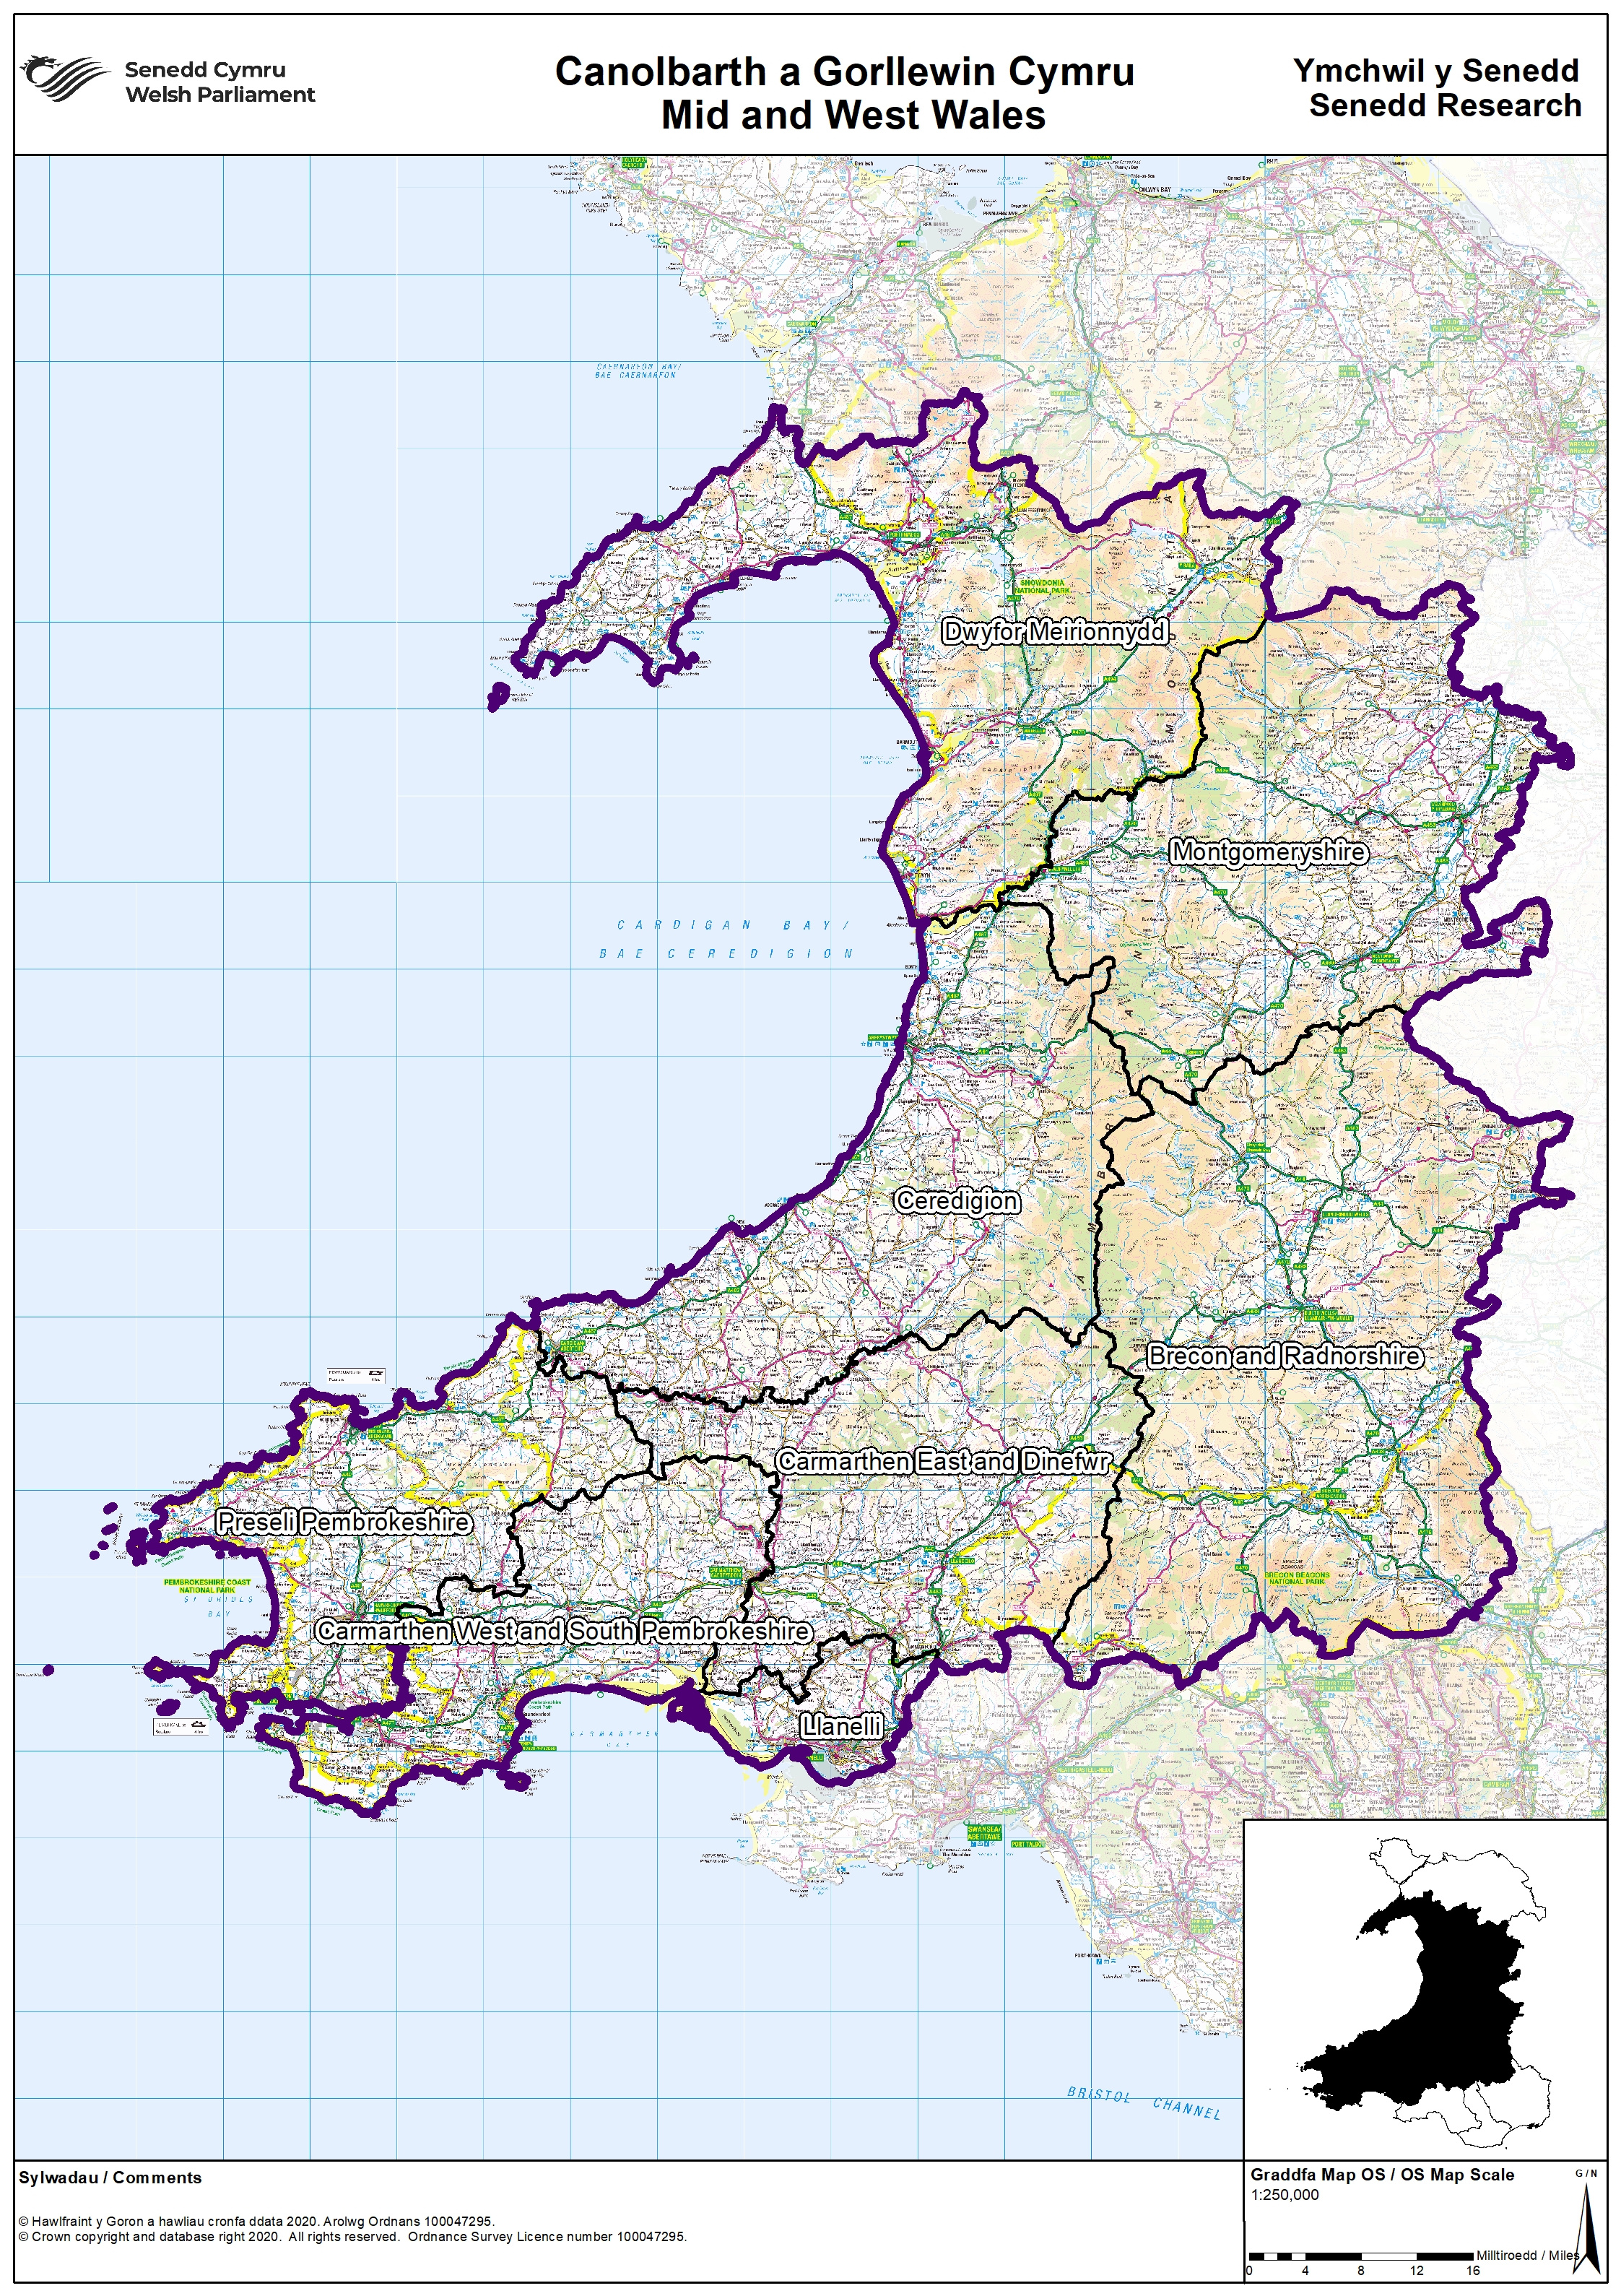 Map of Mid and West Wales